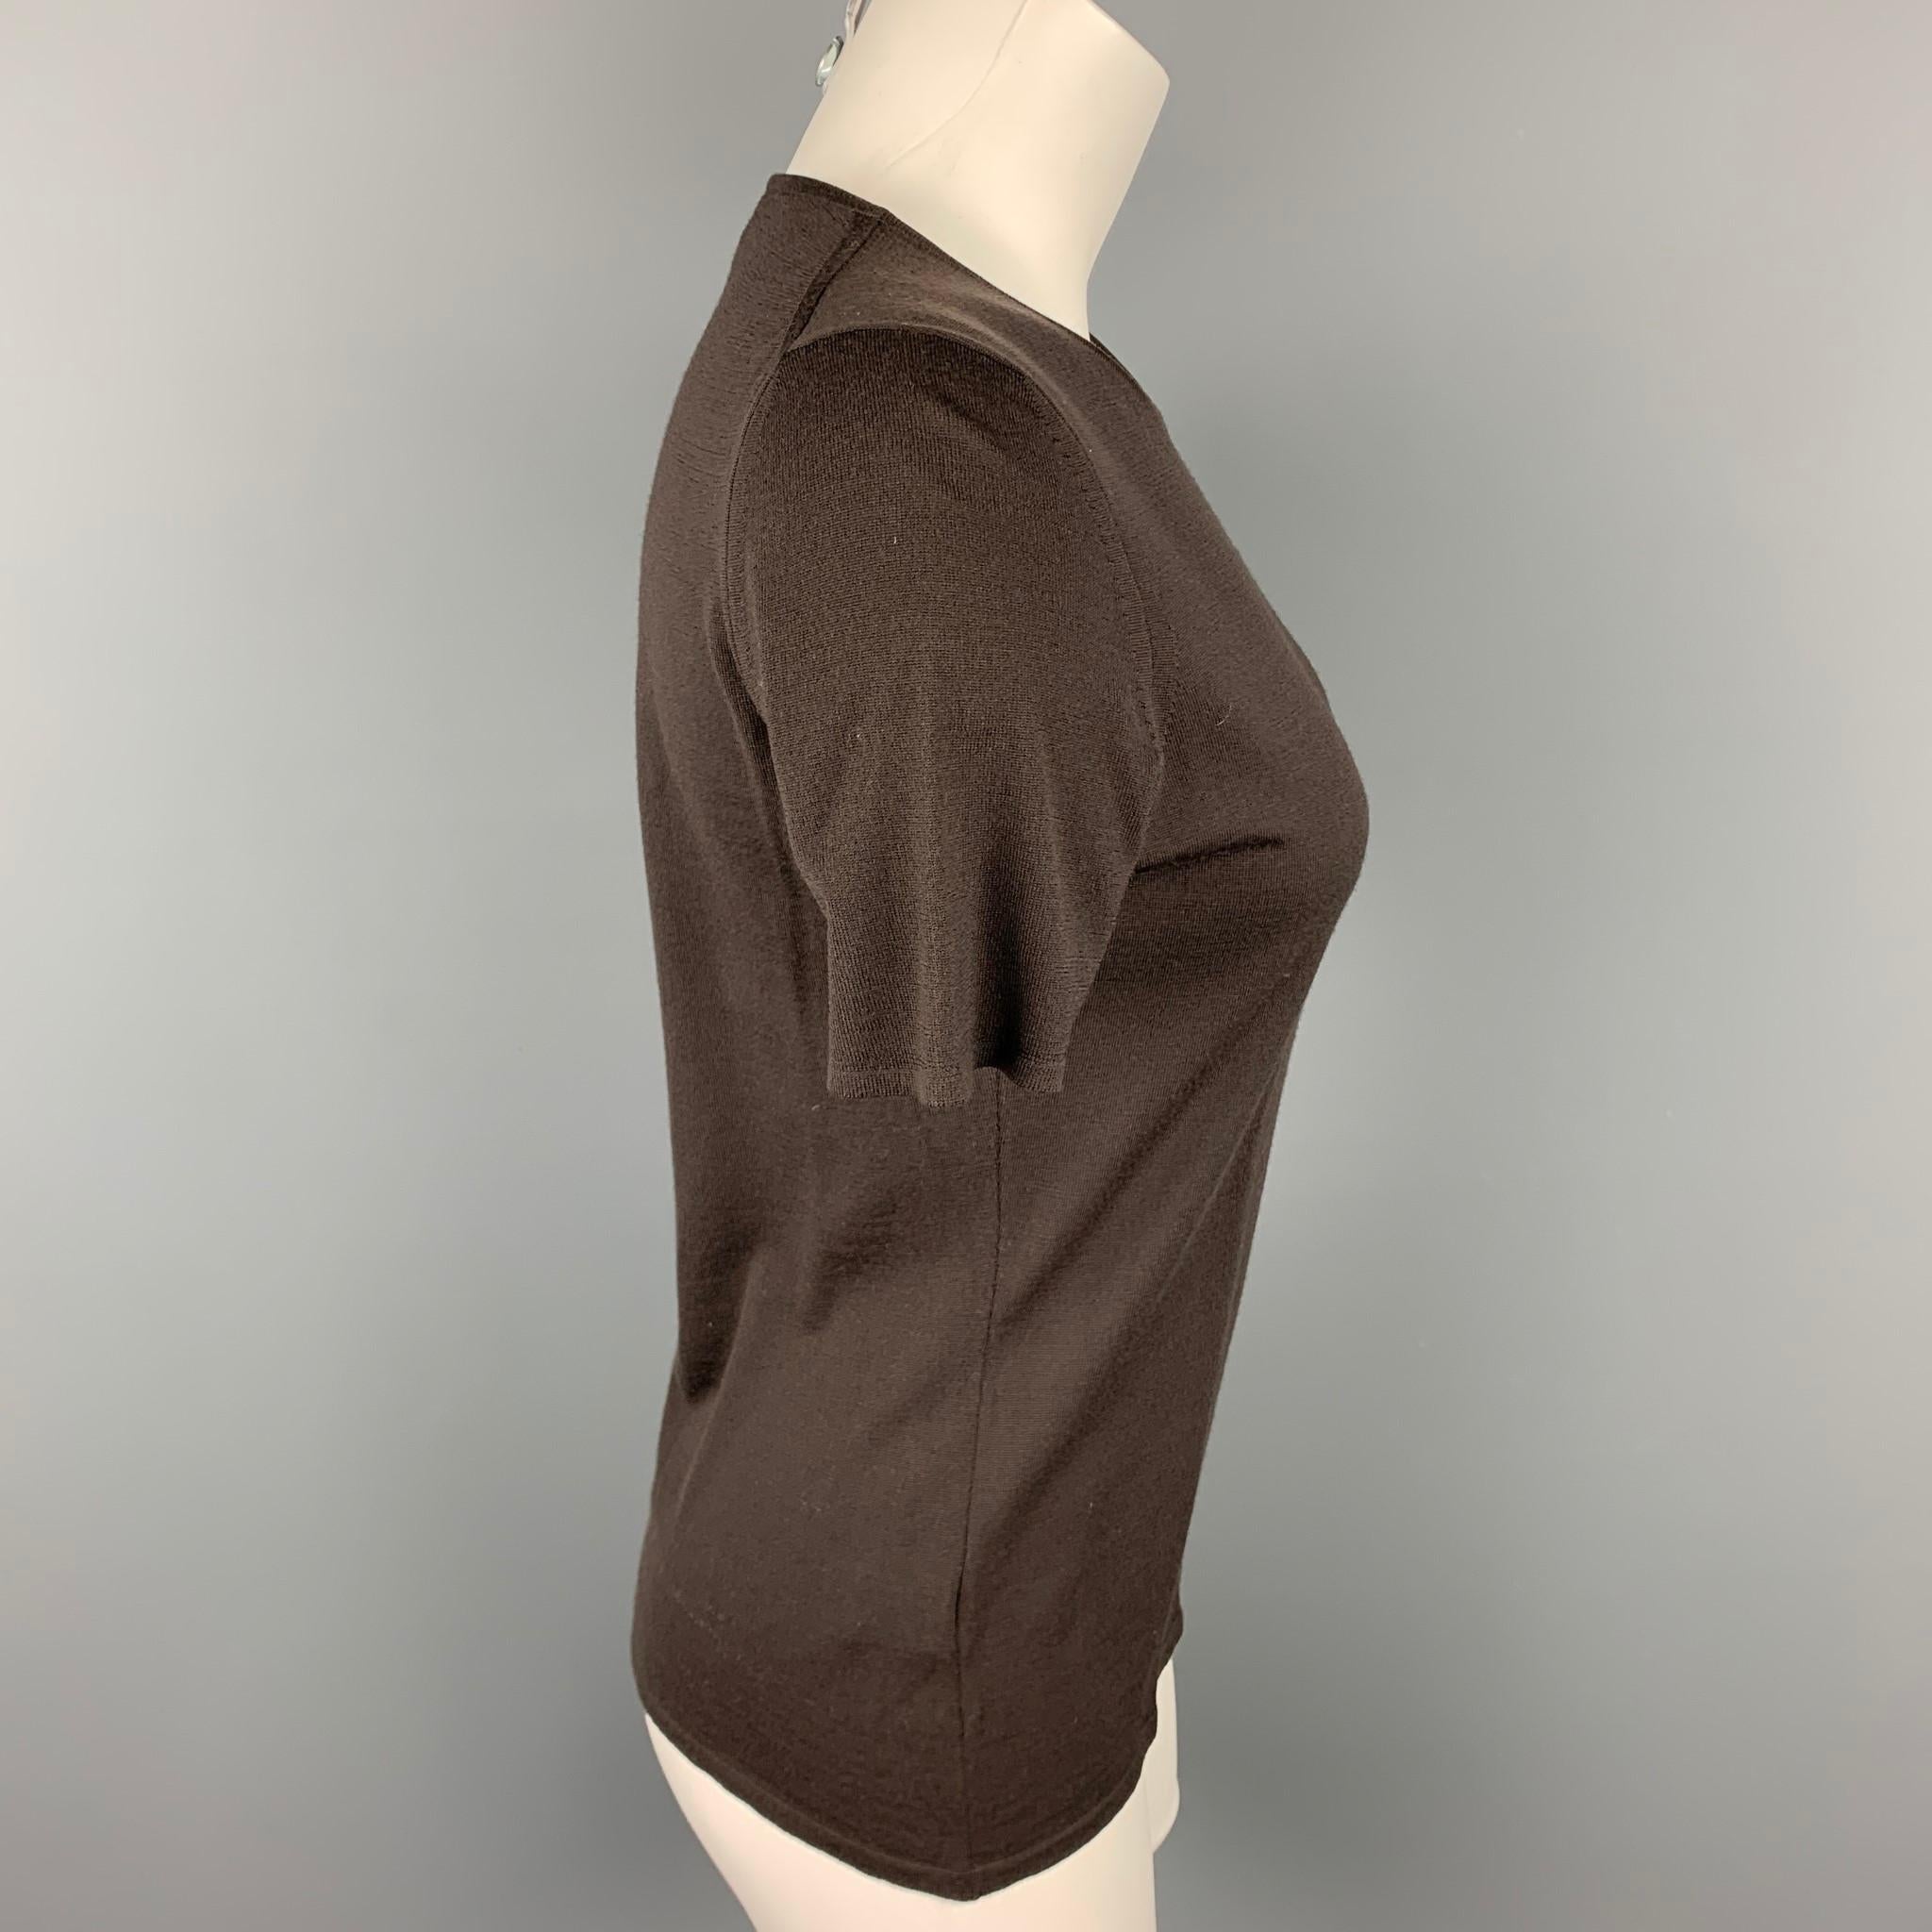 TSE short sleeve pullover comes in a brown knitted wool featuring a crew-neck. Cardigan sold separately. Made in Italy.

Very Good Pre-Owned Condition.
Marked: M

Measurements:

Shoulder: 15 in.
Bust: 35 in.
Sleeve: 9 in.
Length: 22 in. 

SKU: